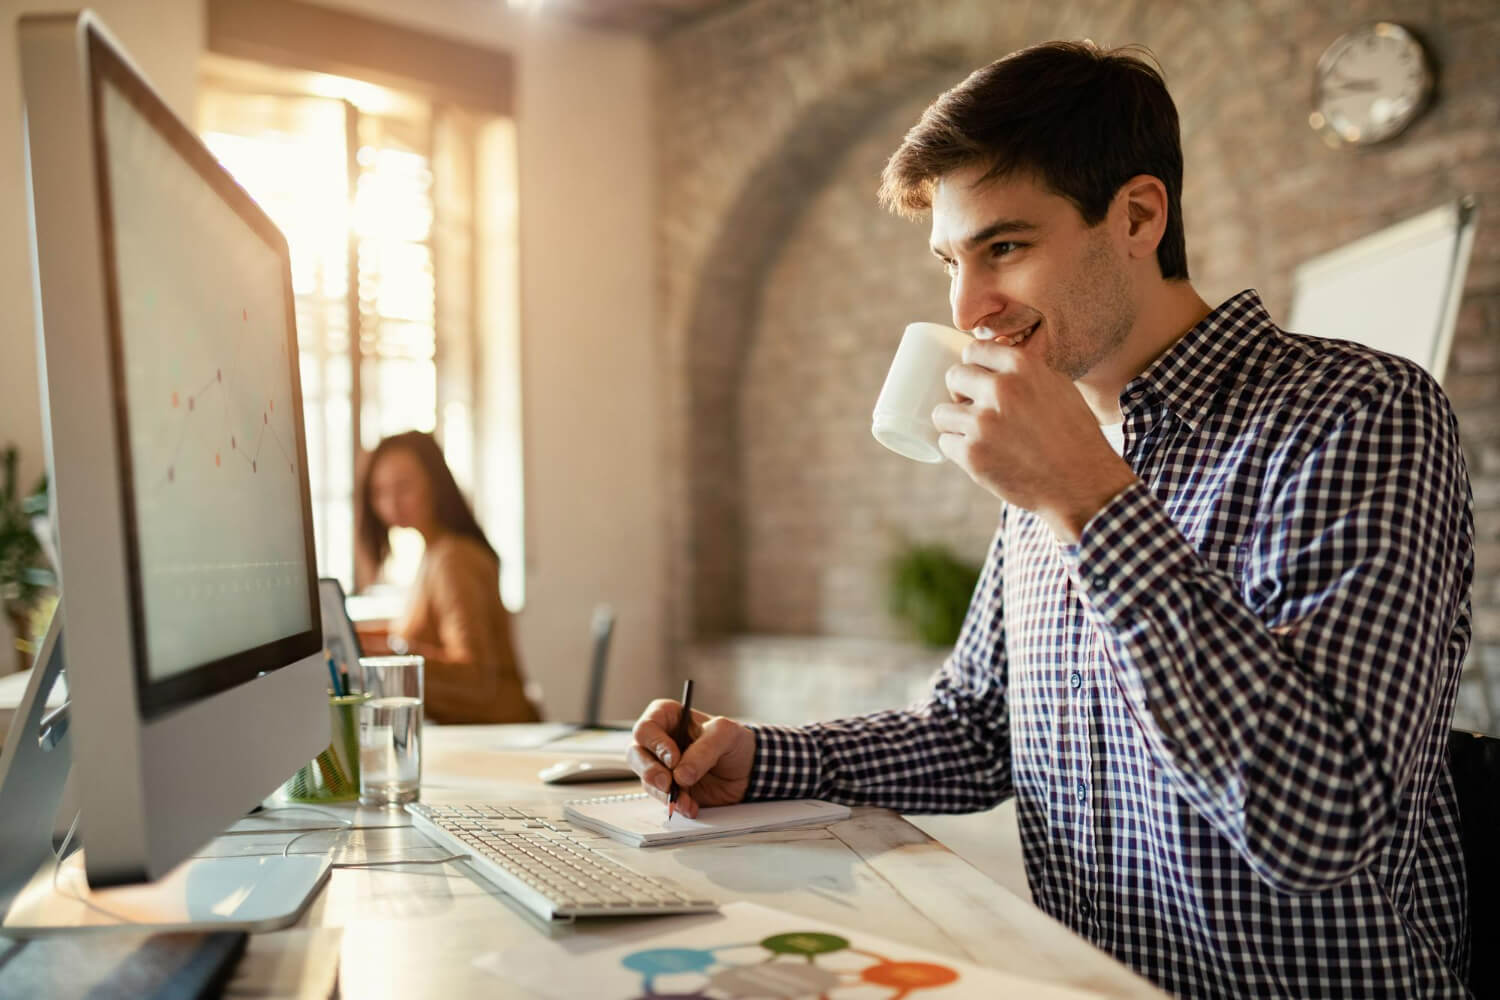 Man sipping coffee while smiling at computer